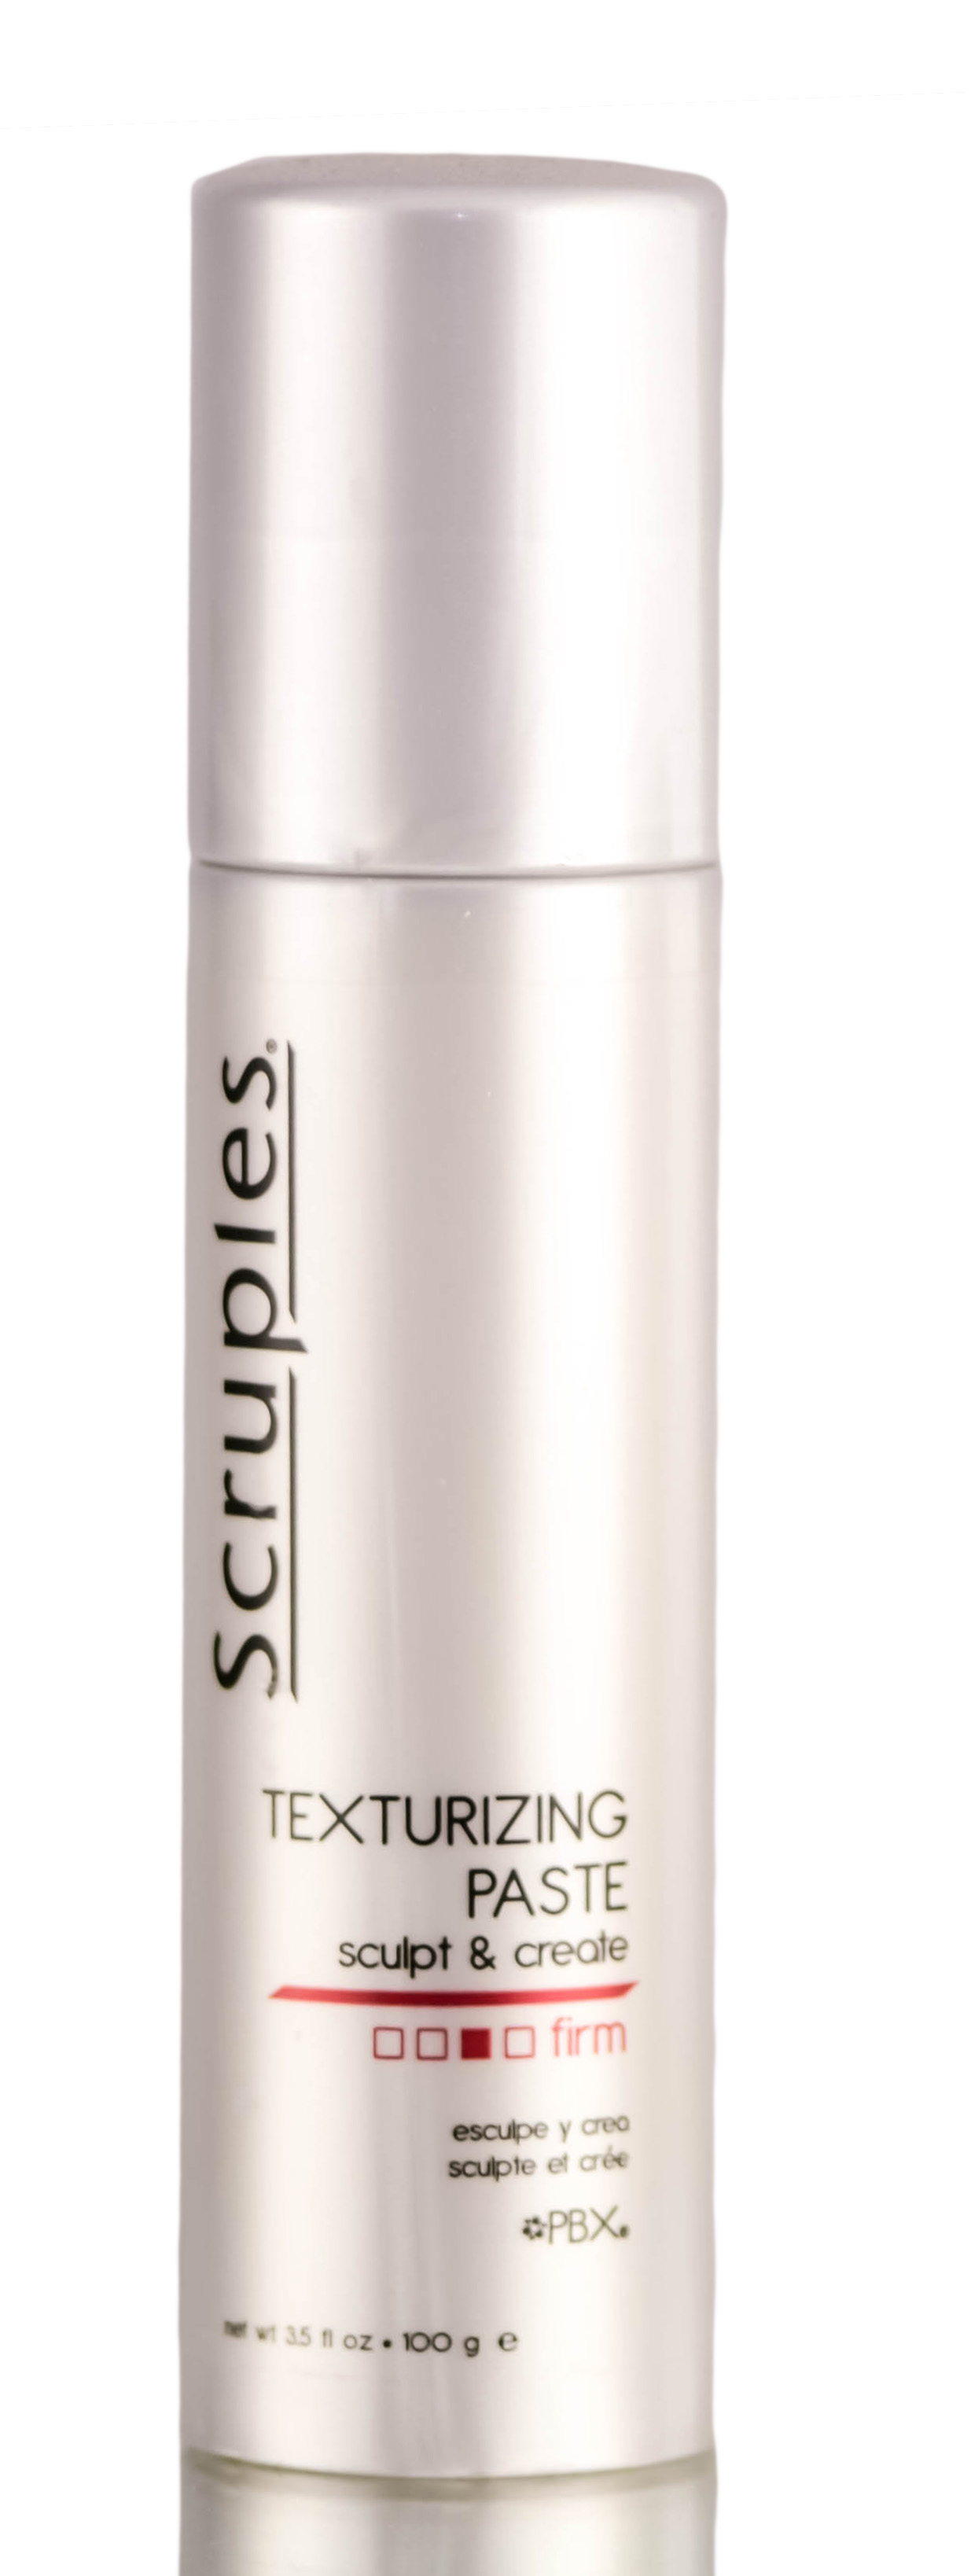 Scruples Hair Care Products (Hair Care:3.5oz Texturizing Paste;) - image 1 of 2